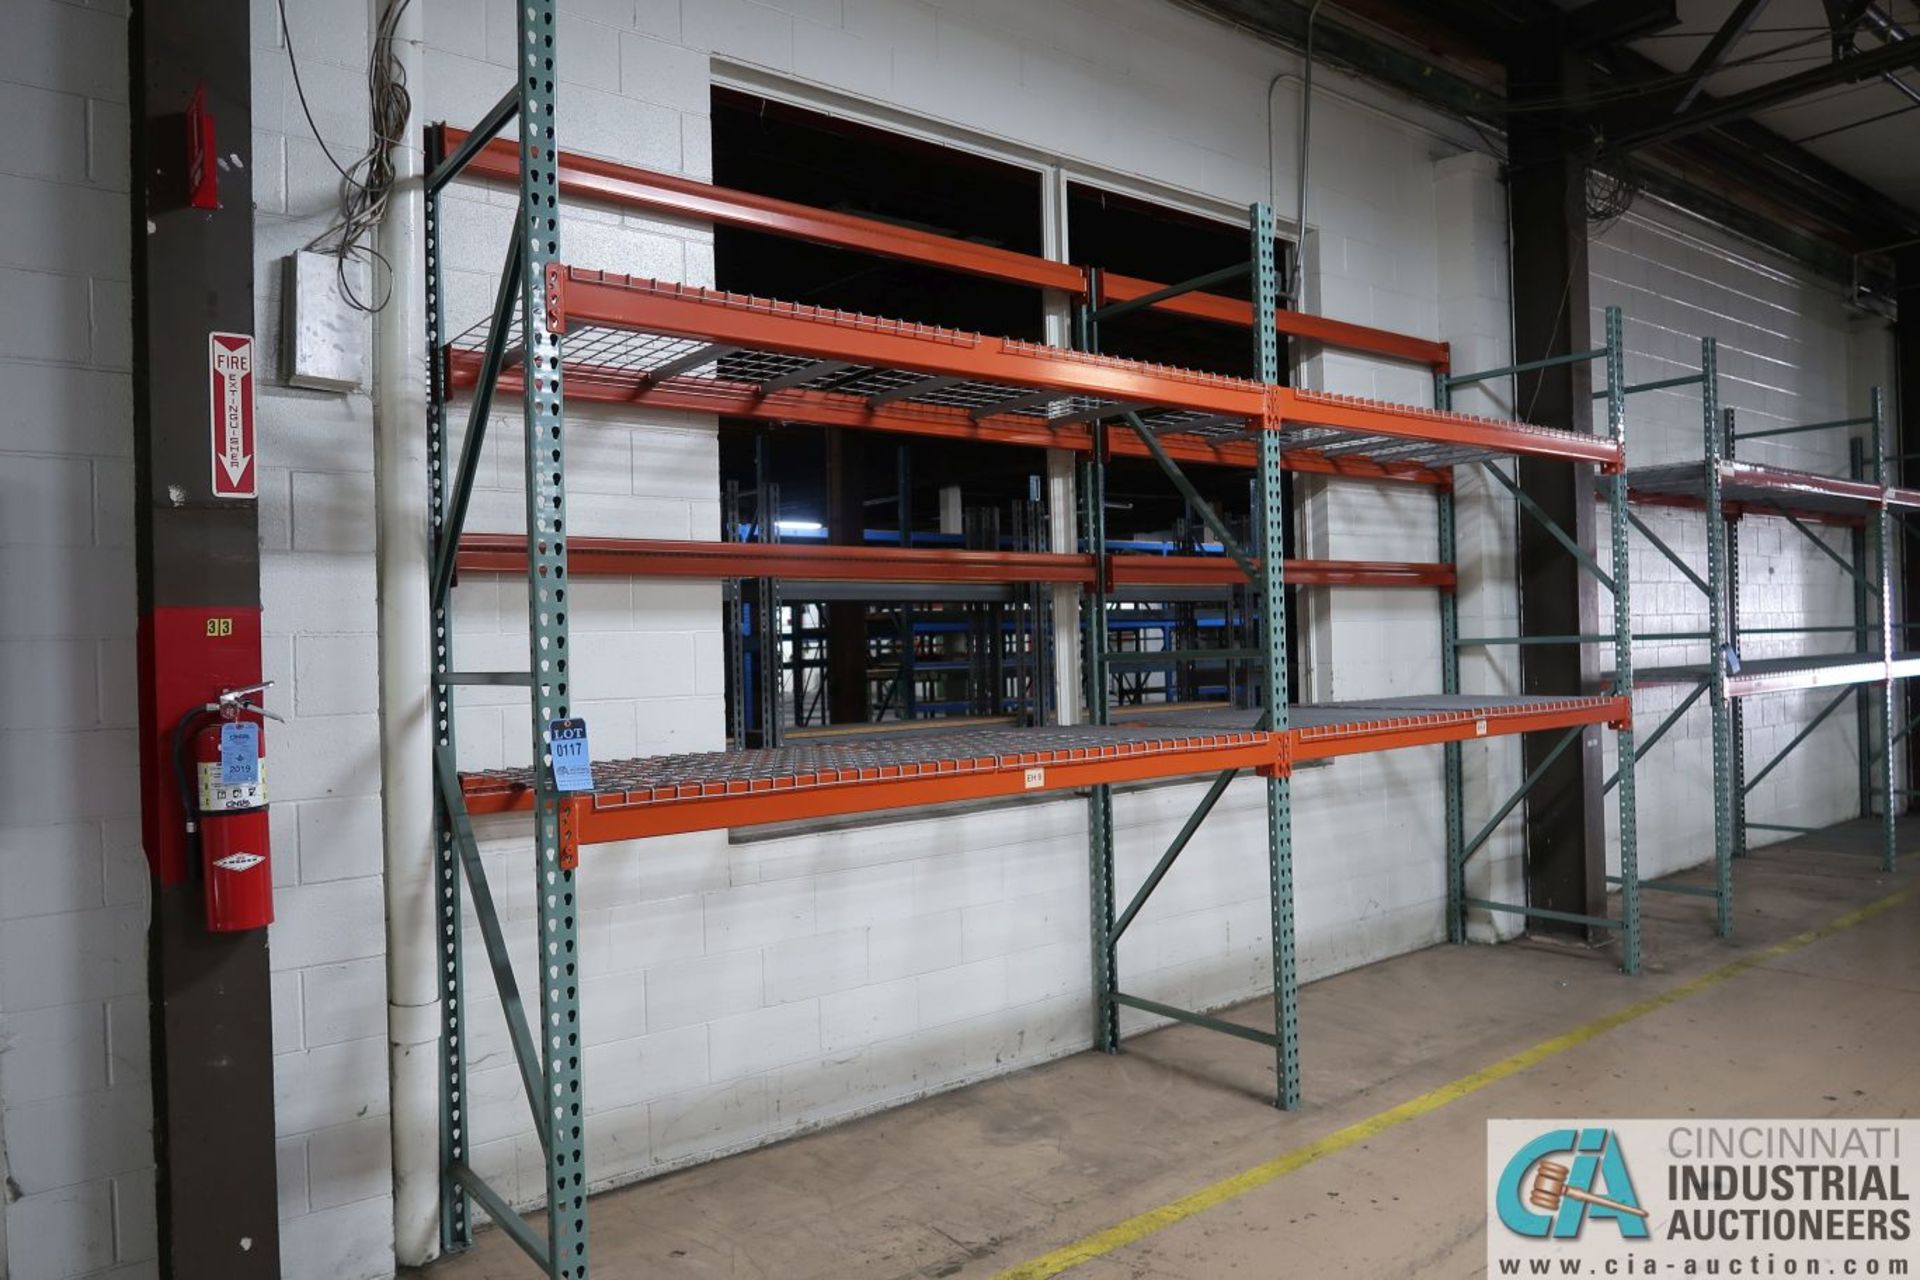 Sections 36" x 8' x 10' High Pallet Rack; (6) 3' x 10' Uprights, (10) 4" x 8' Beams, (16) Wire